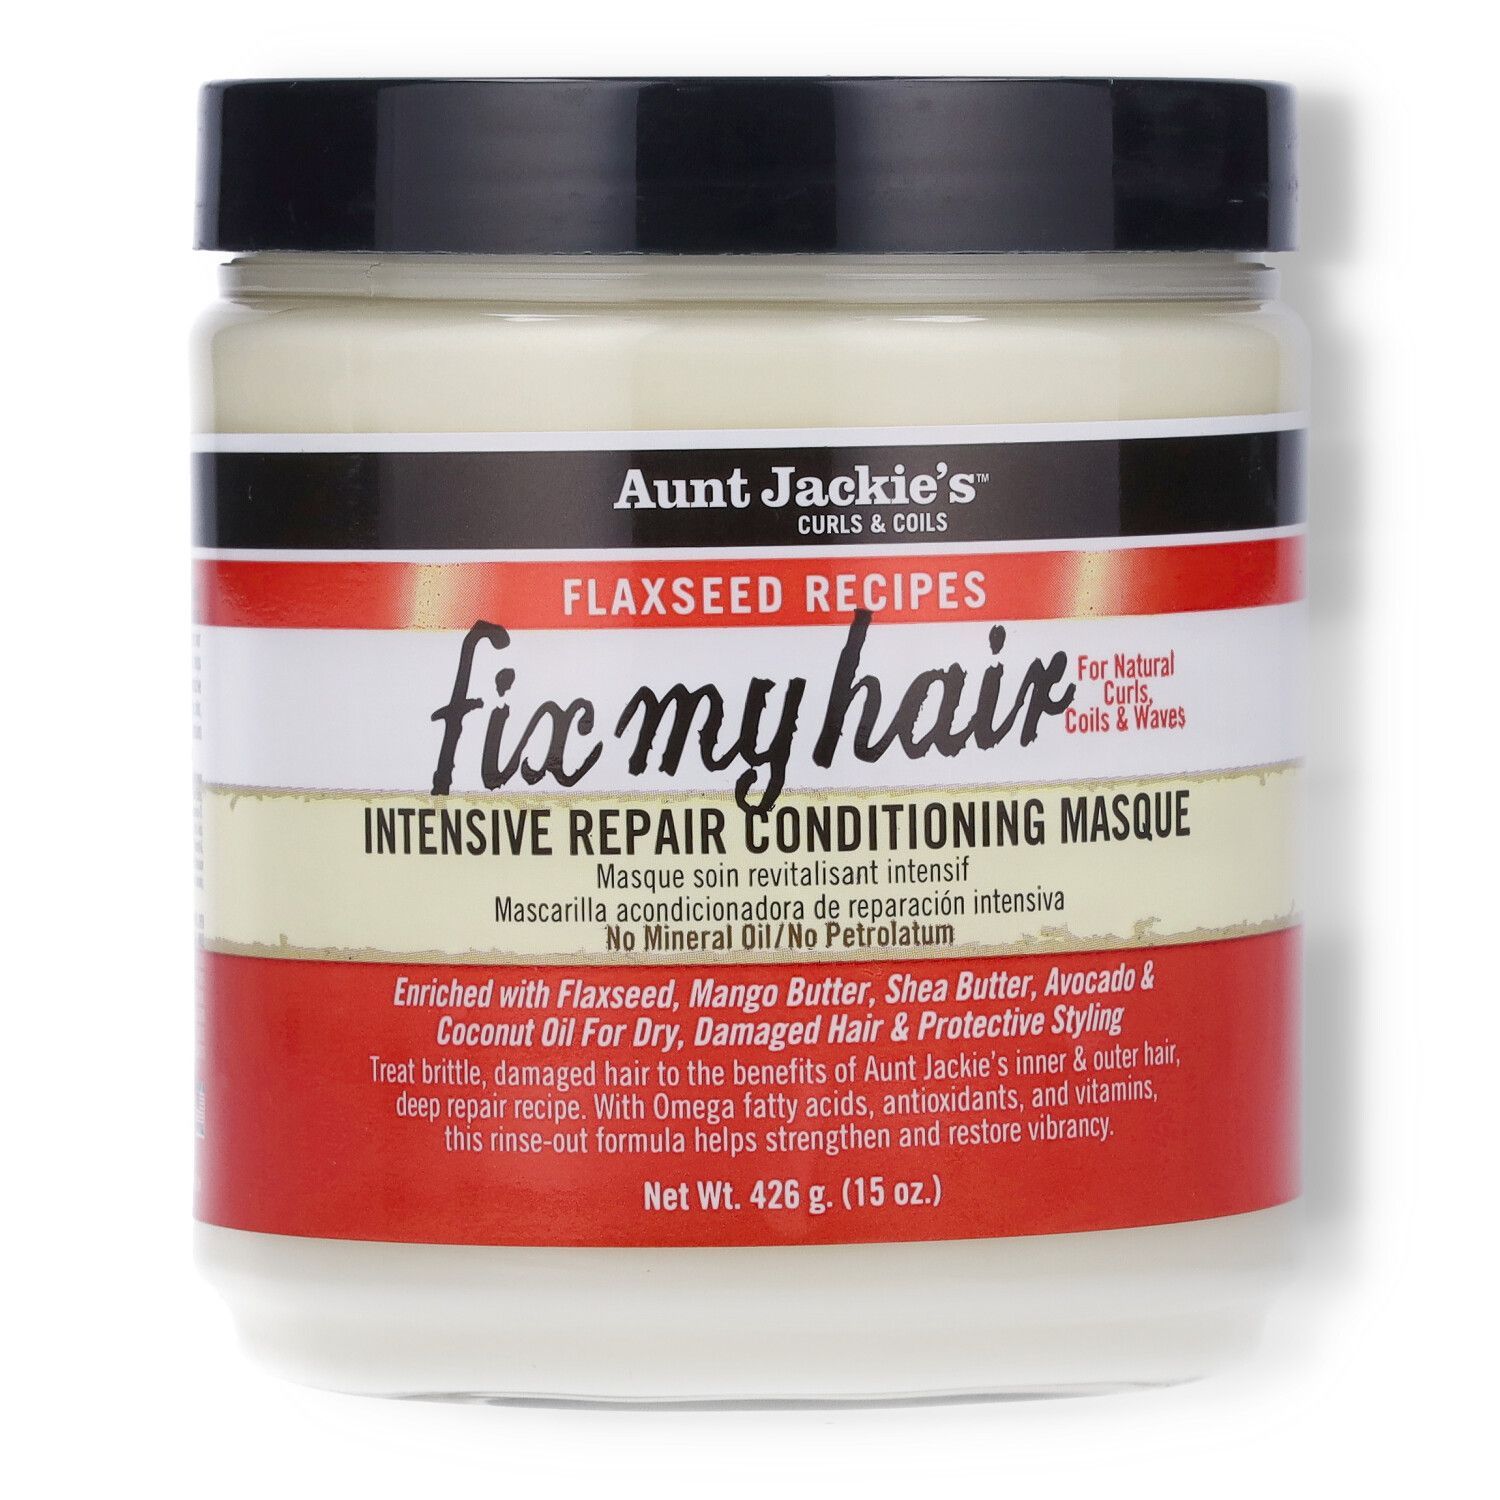 Aunt Jackie’s Fix My Hair Intensive Repair Conditioning Masque - 15oz